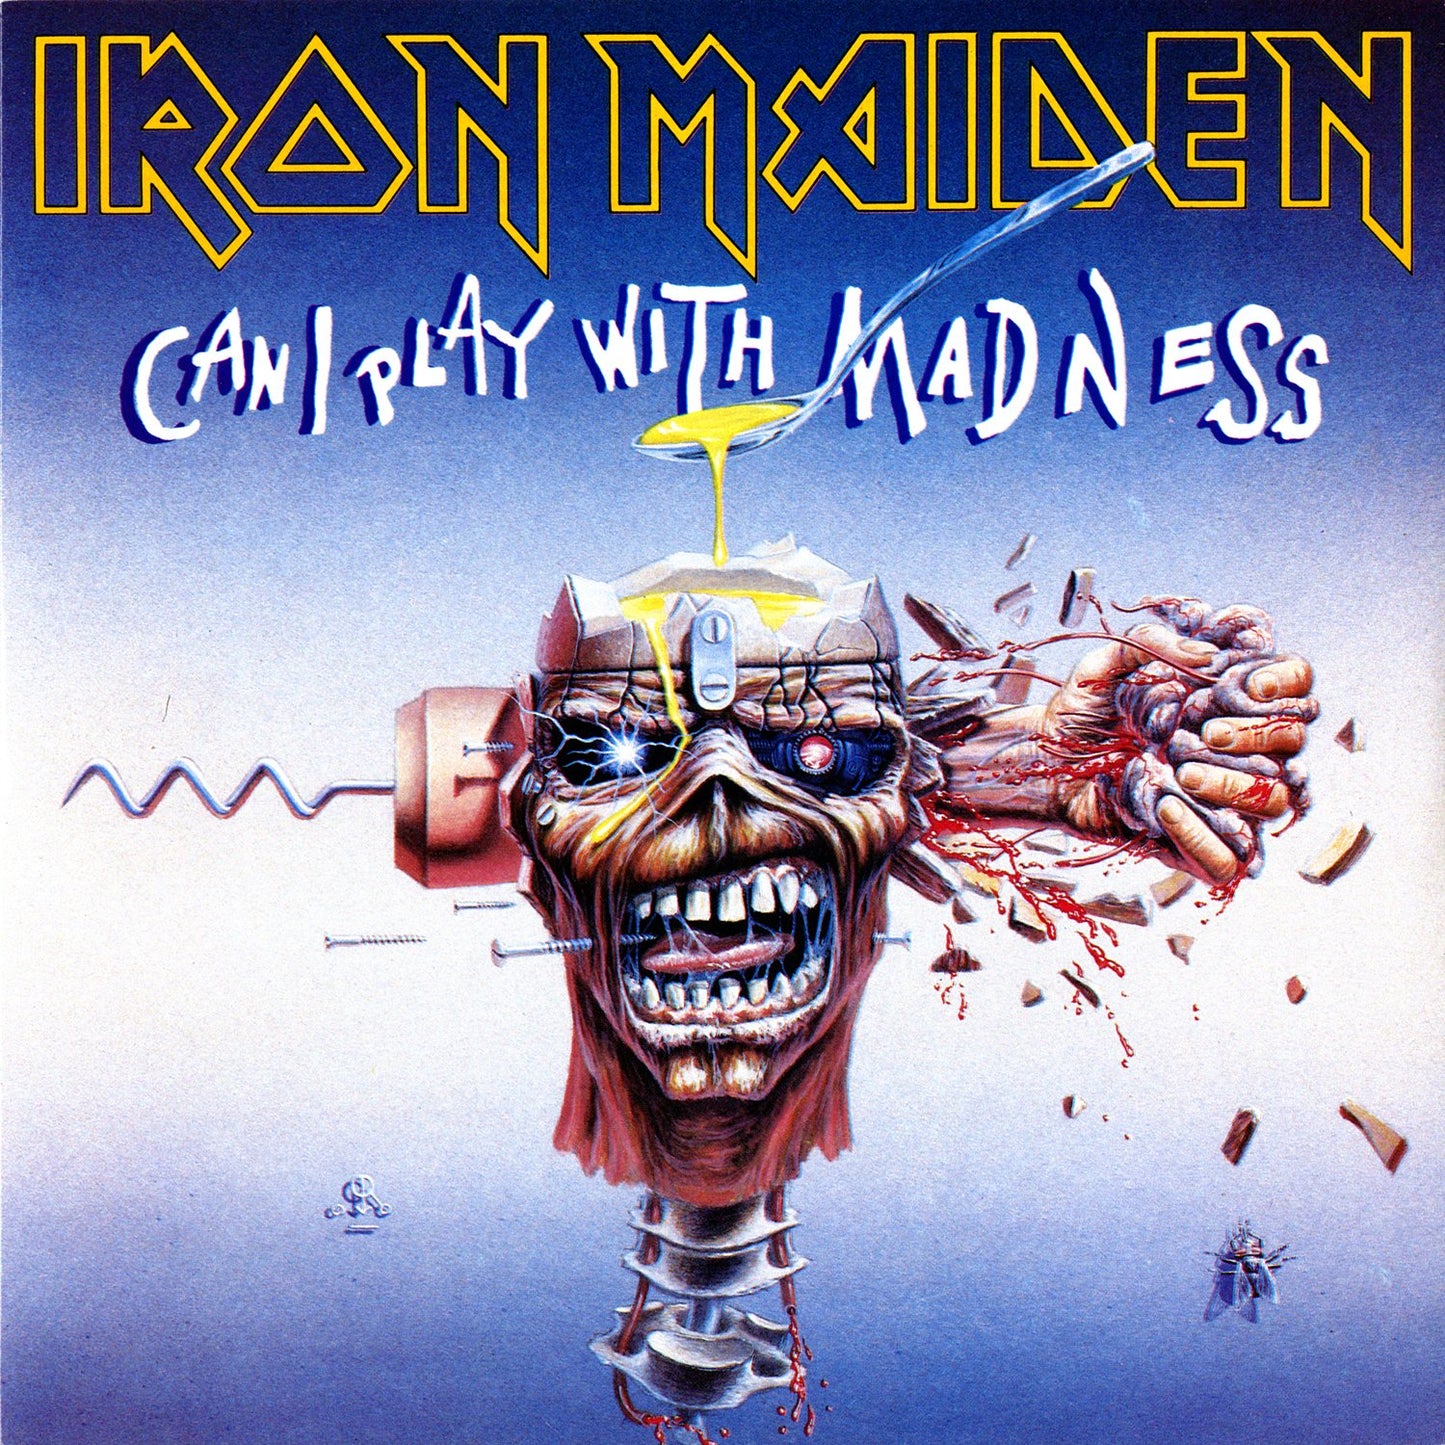 Iron Maiden "Can I Play With Madness" 7"